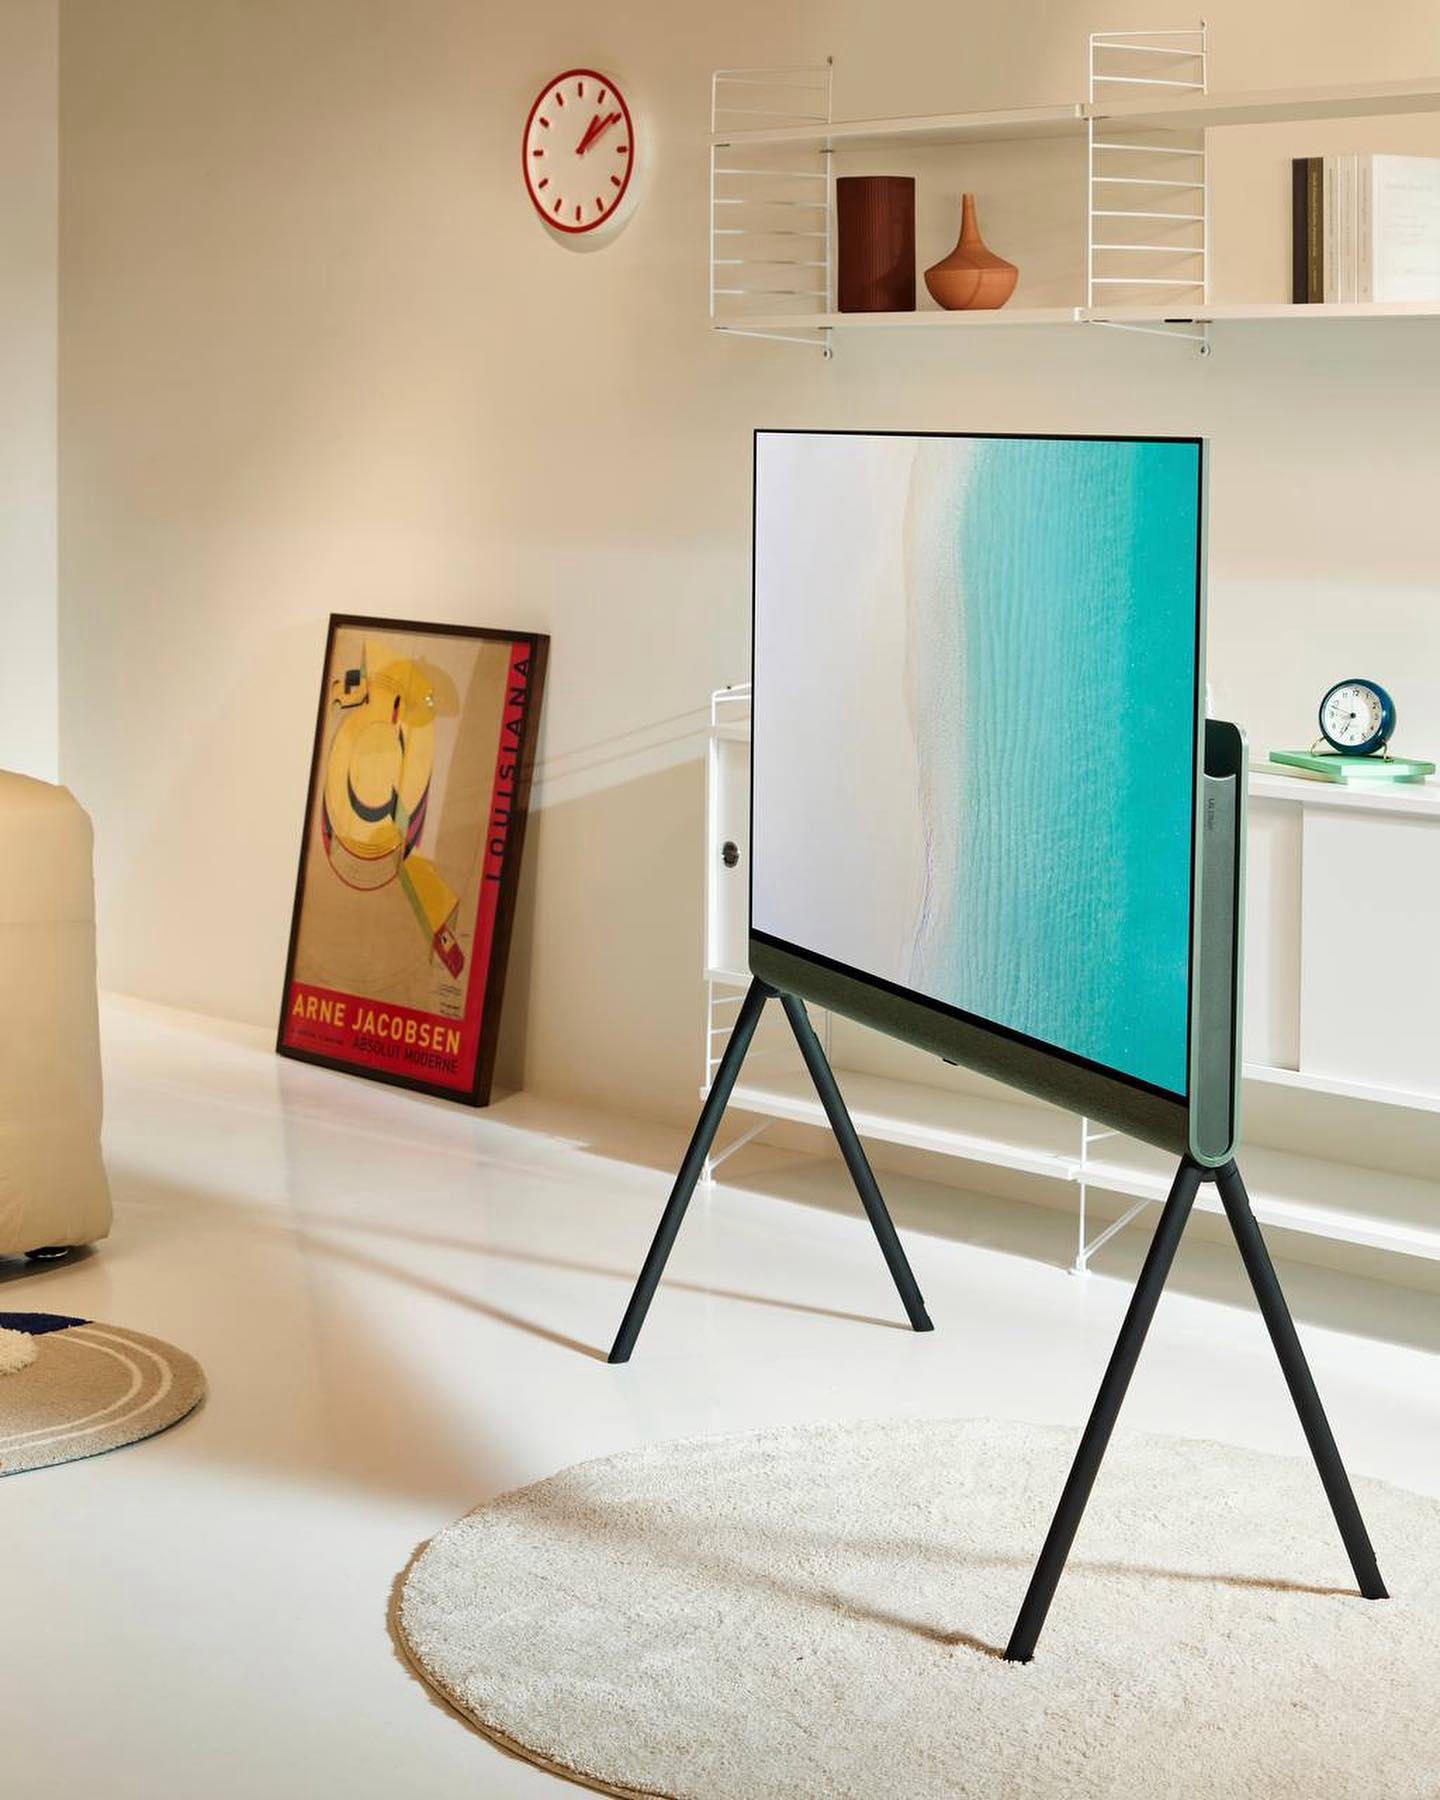 image  1 Lordd_Products - Searching for TV other than wall mounting or standing